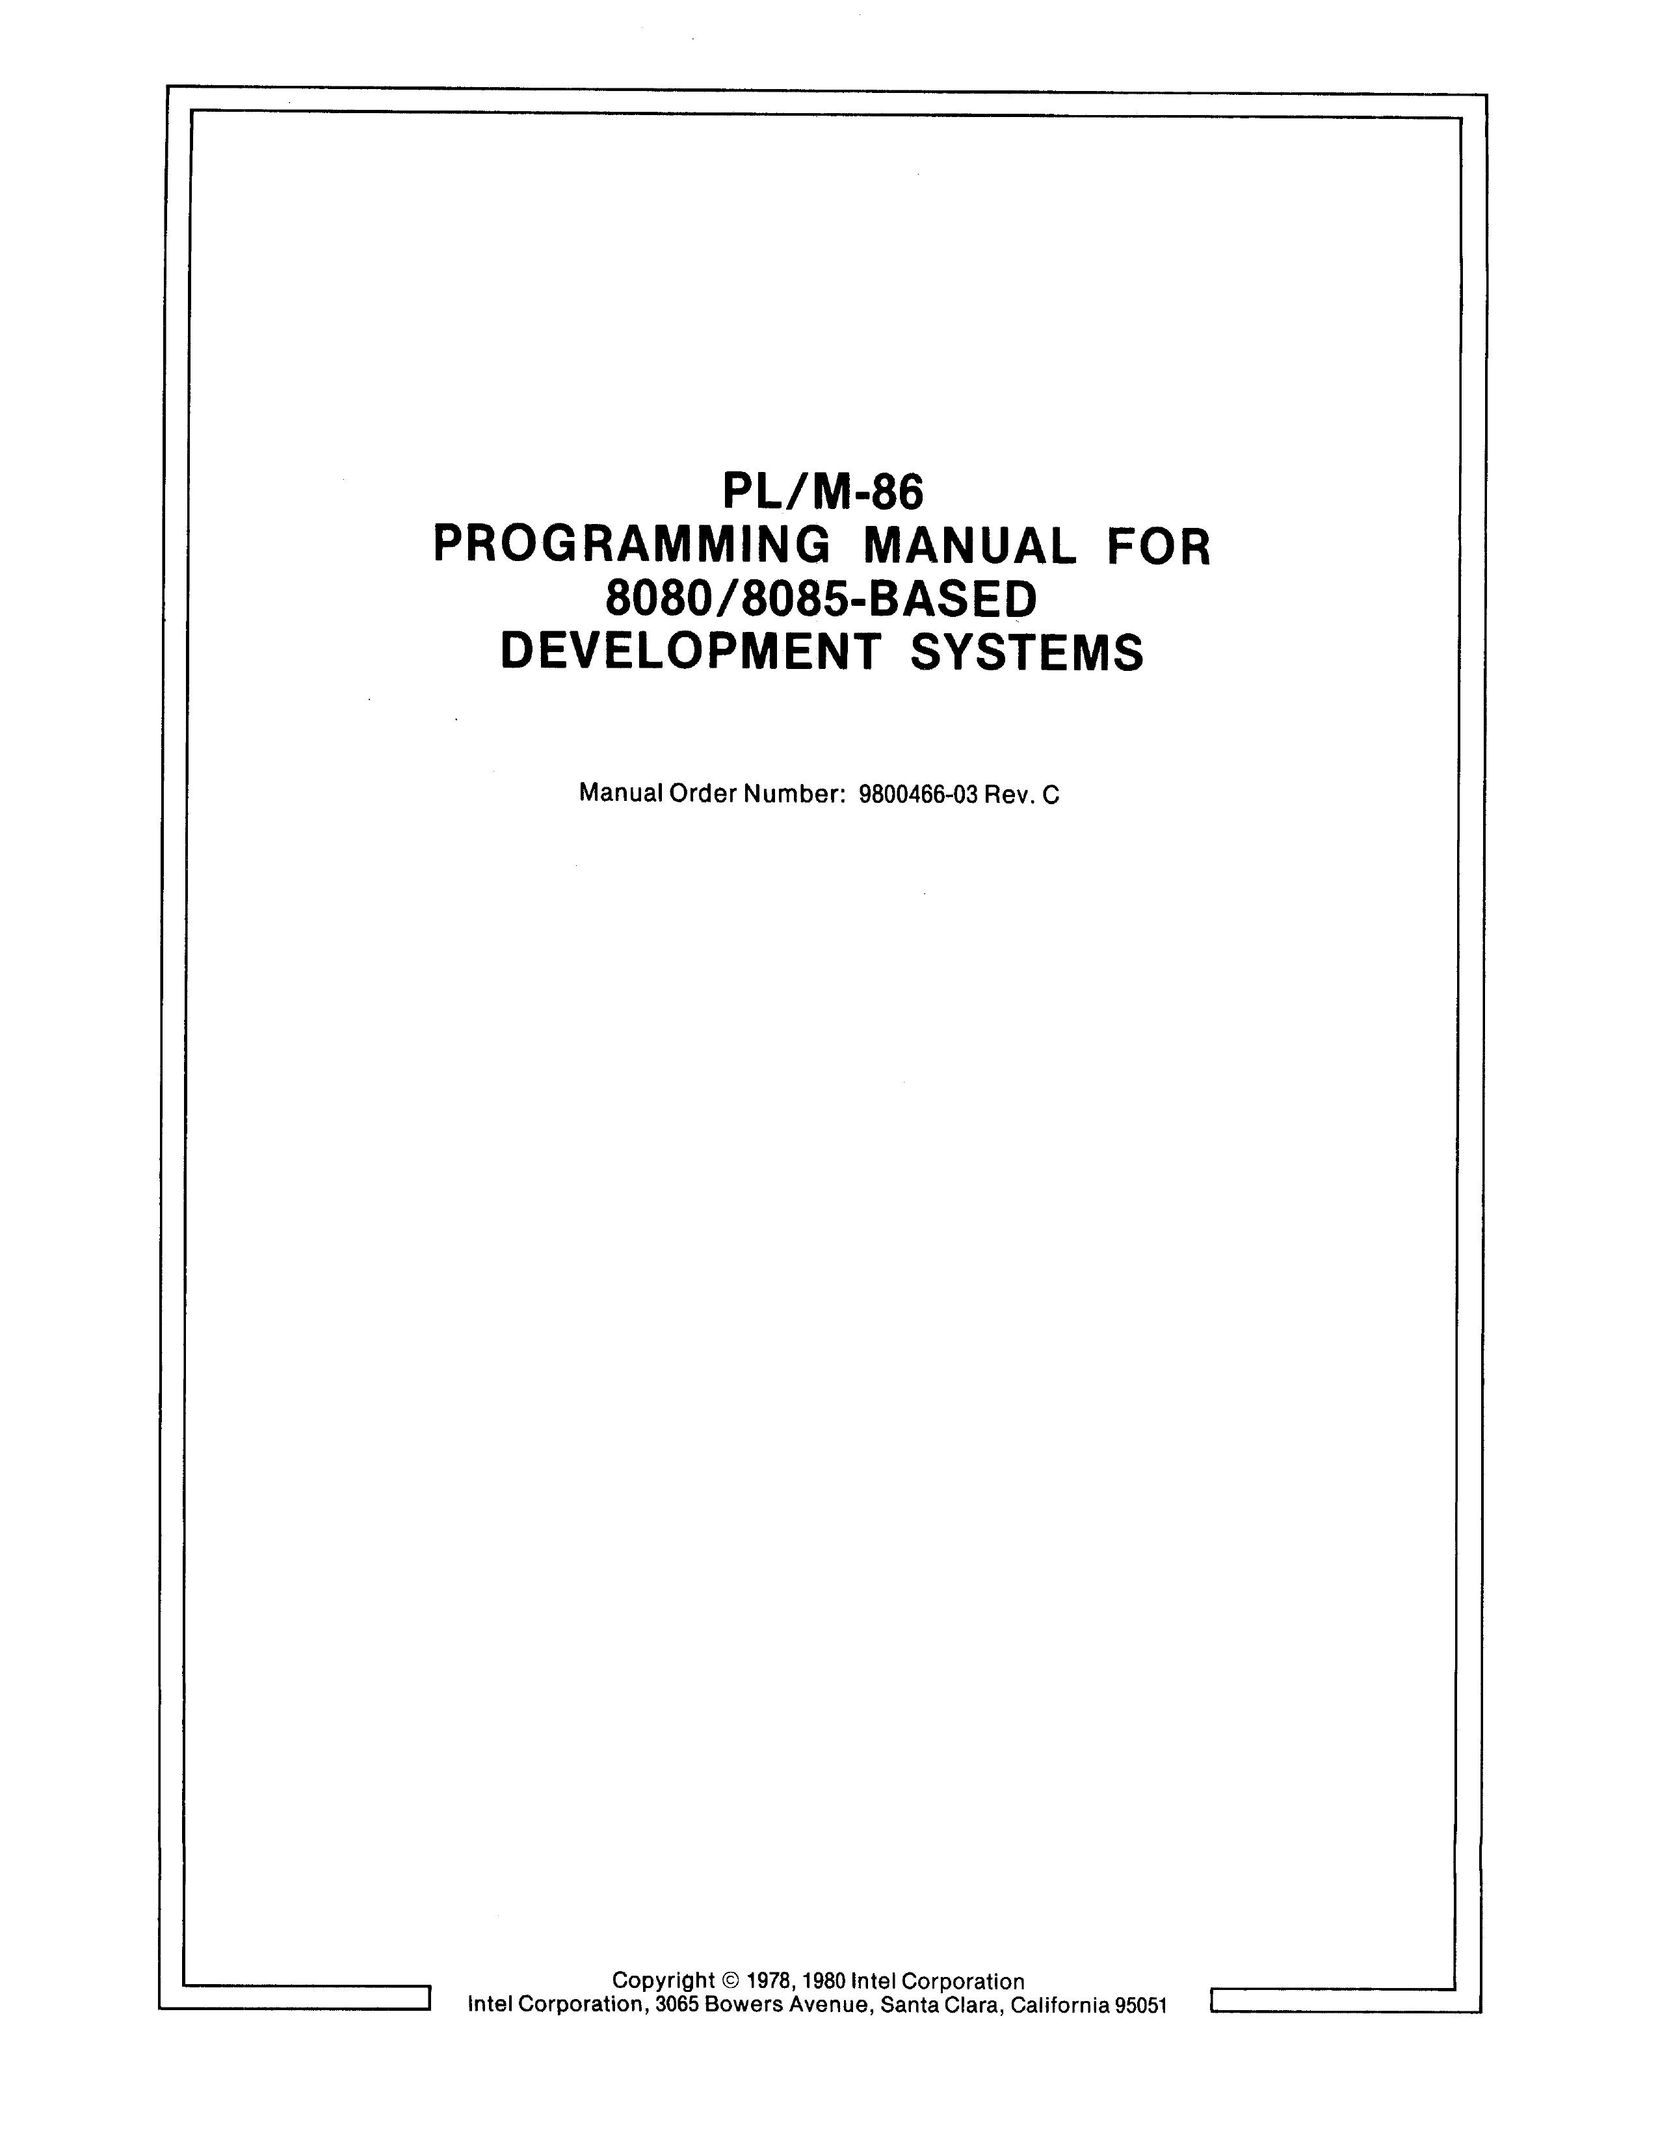 Intel 8085-based Projection Television User Manual